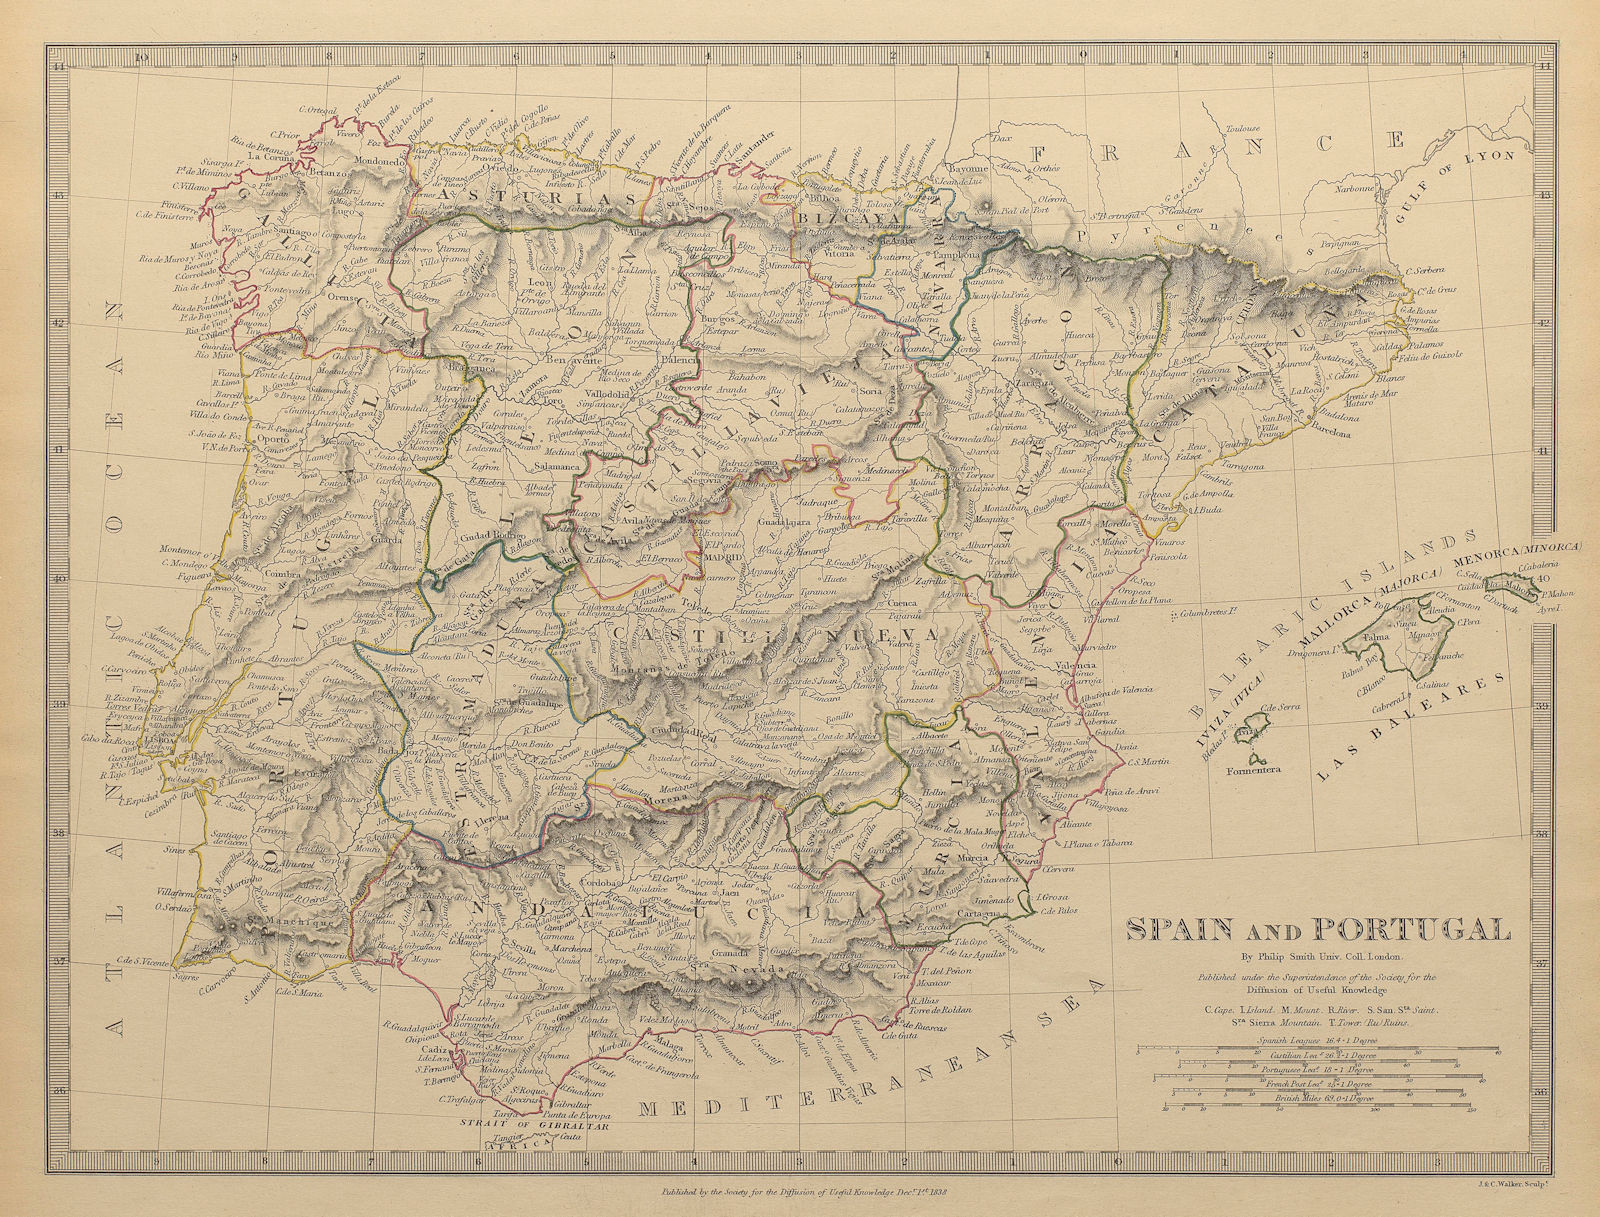 IBERIA. Spain and Portugal showing provinces. SDUK 1844 old antique map chart